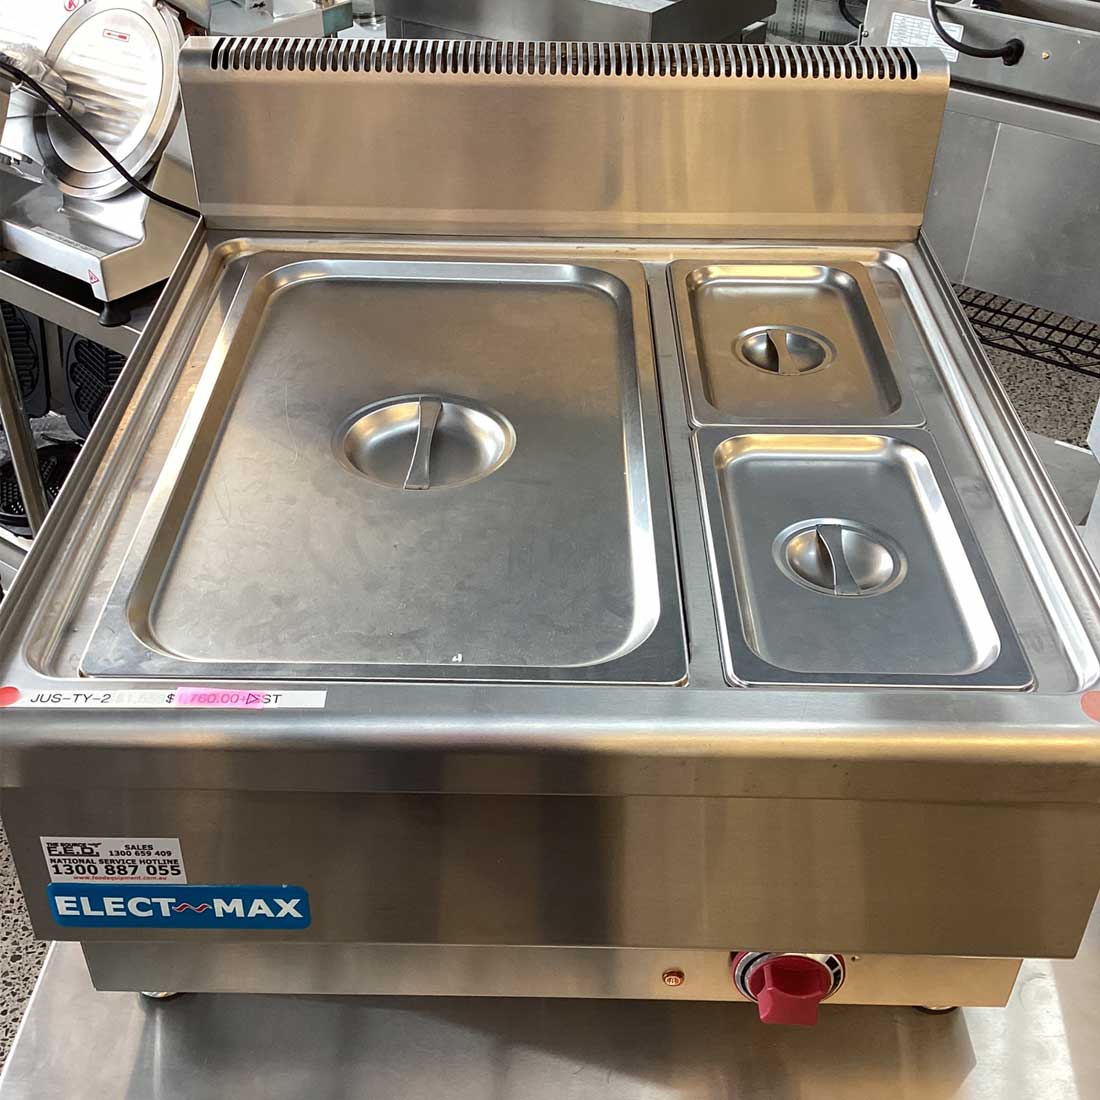 ex-showroom-dry-bain-marie-with-1-1-pan-gn-pan-lid-jus-ty-2-2